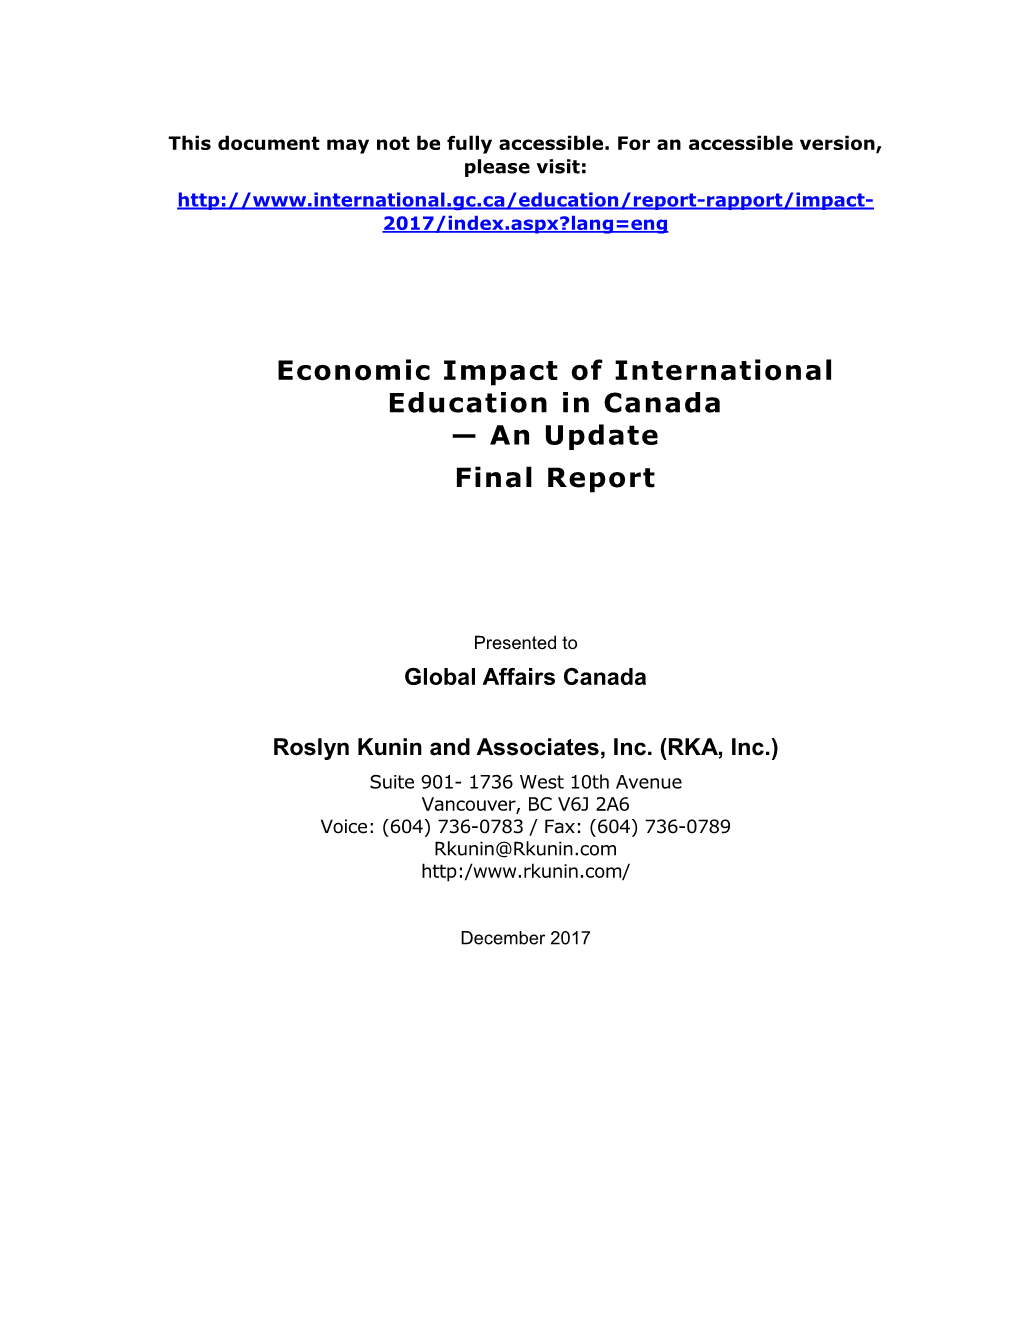 Economic Impact of International Education in Canada — an Update Final Report